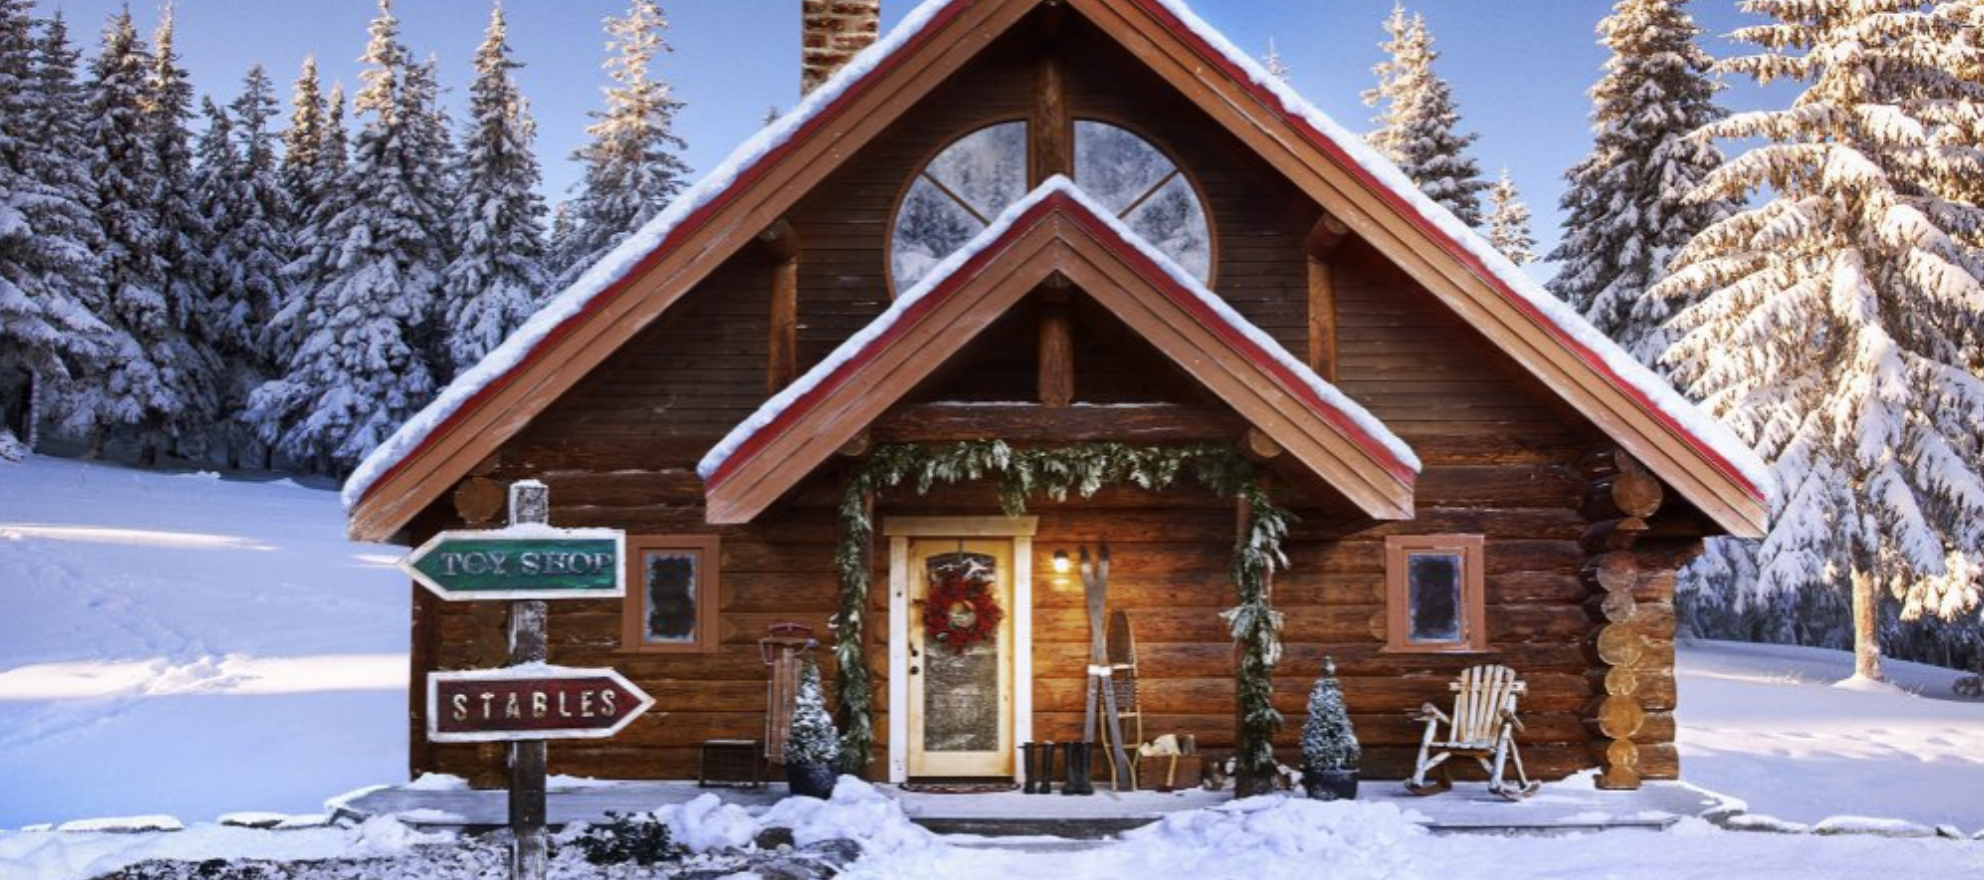 Santa Claus's North Pole estate is worth $764K: Zillow